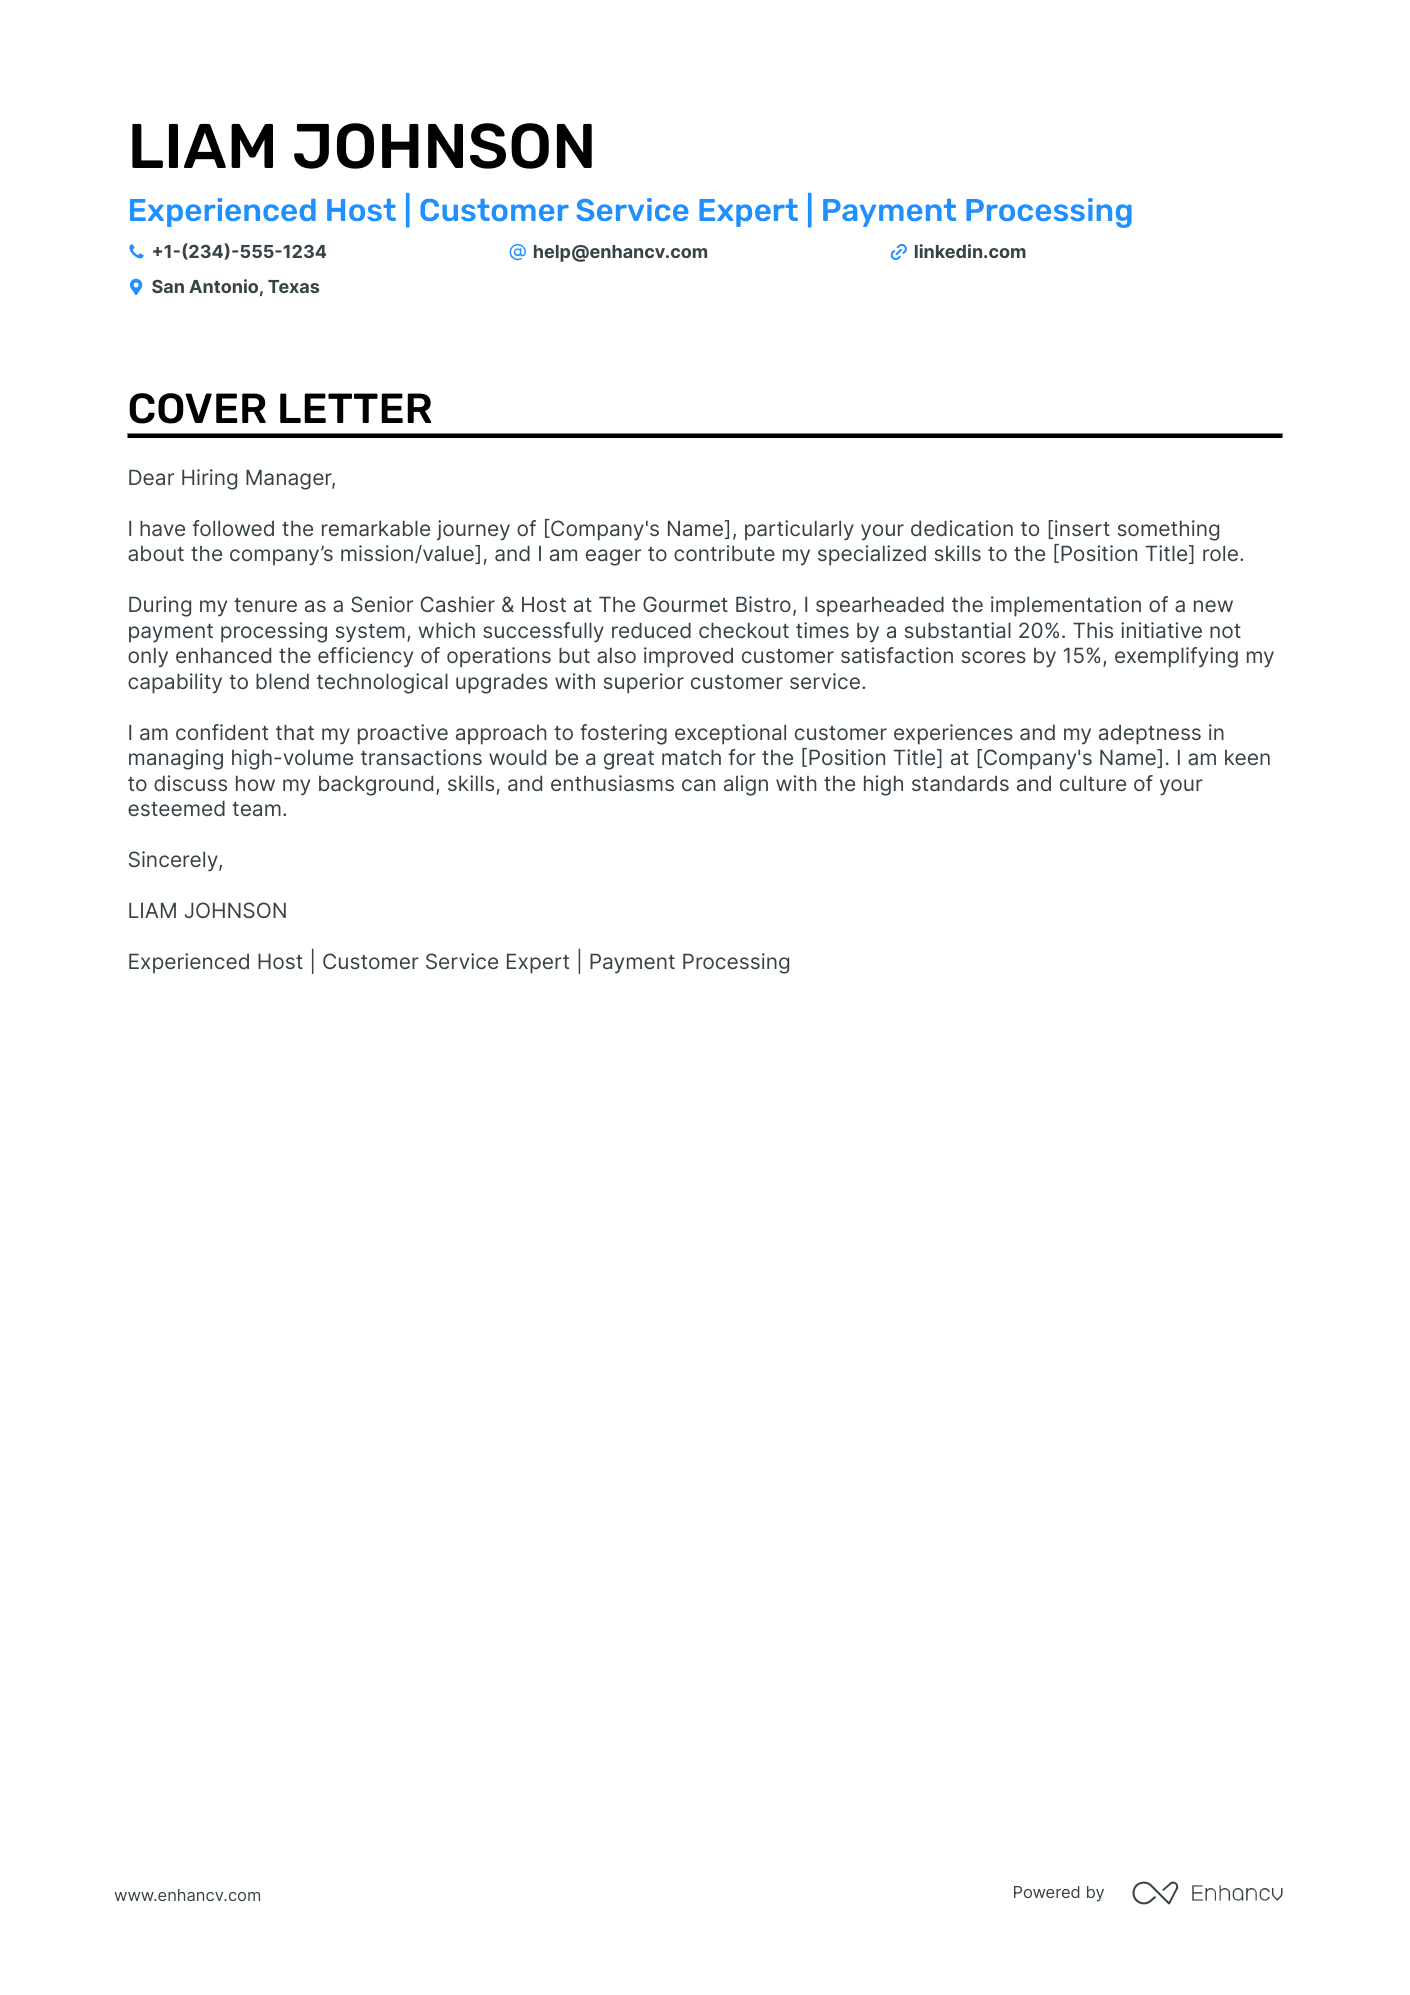 application letter for job as a cashier